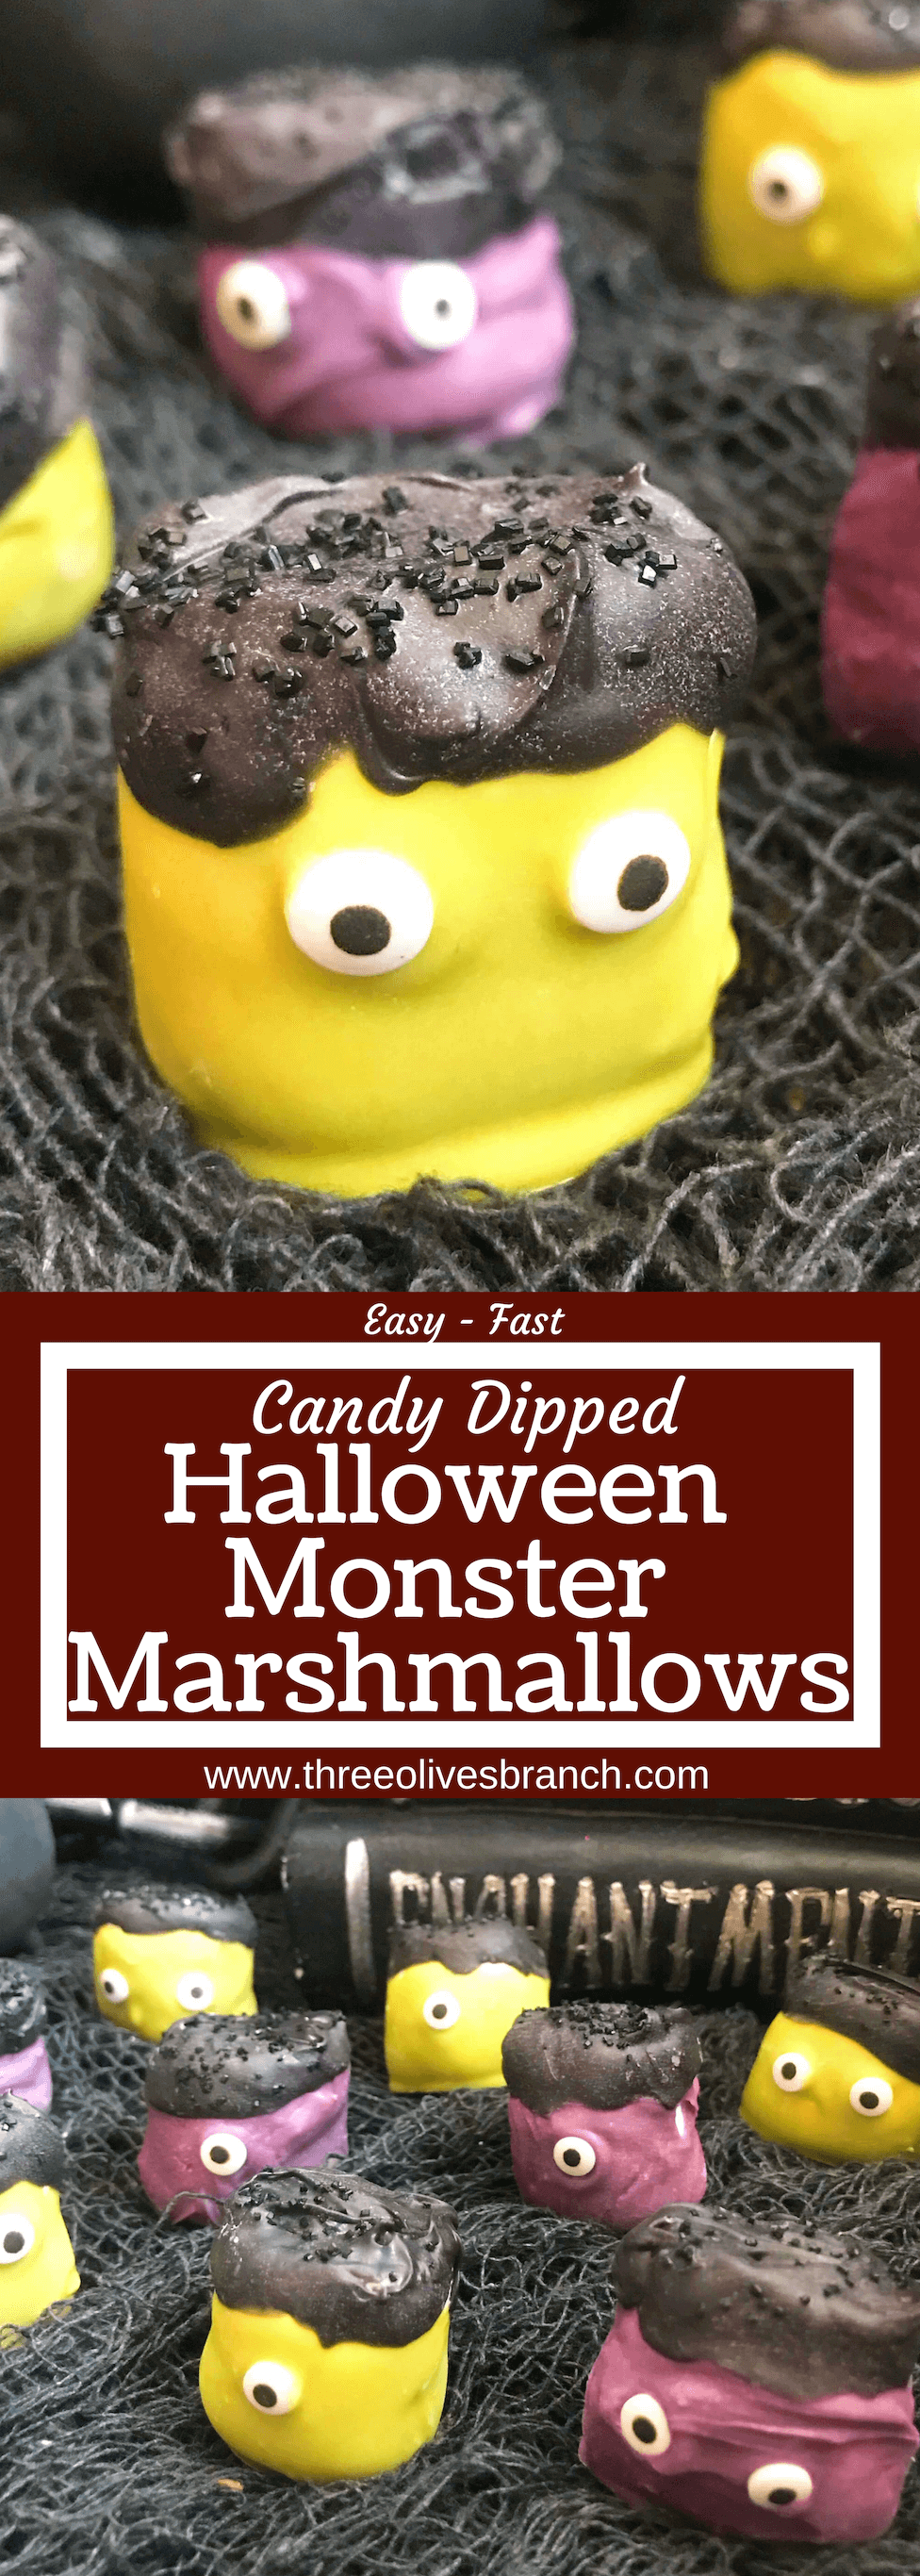 Halloween Candy Dipped Monster Marshmallows - Three Olives Branch